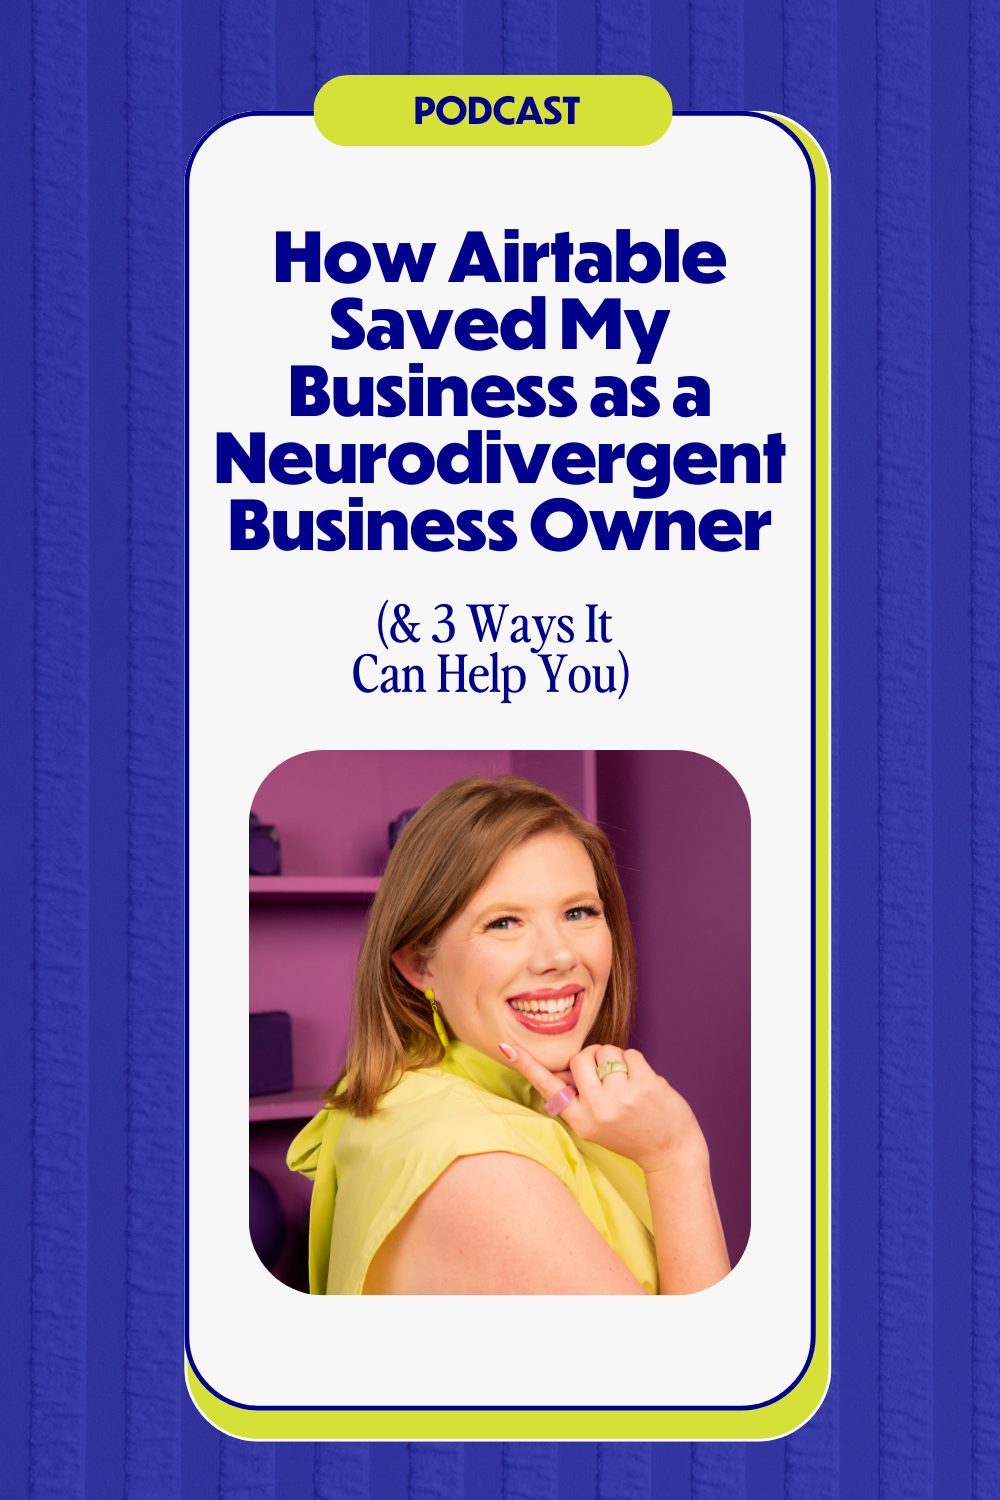 Ashley Rose, a Systems and Airtable Expert, smiling and posing with her hand on her chin, titled "How Airtable Saved My Business as a Neurodivergent Business Owner."